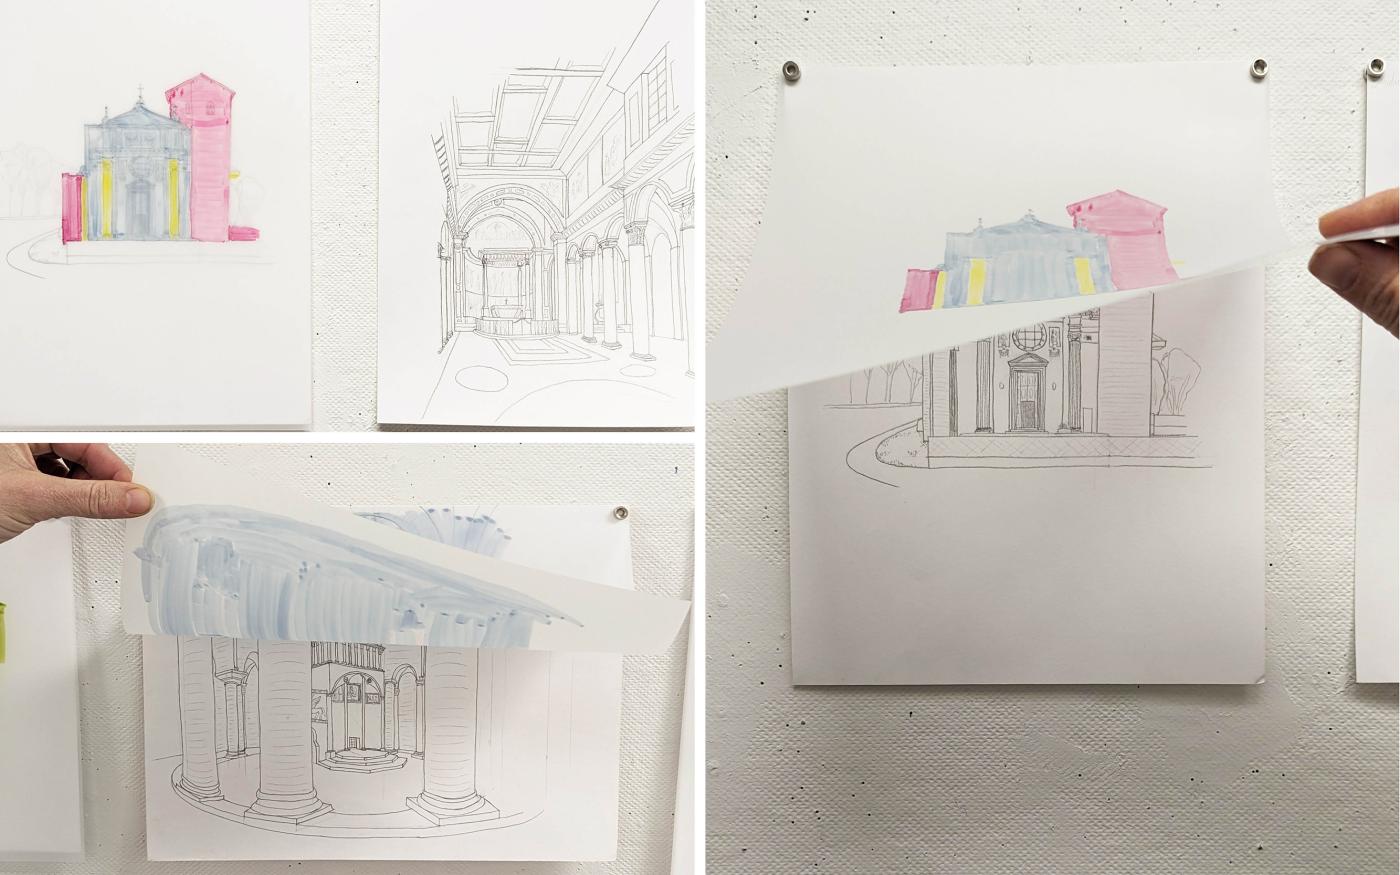 Drawings of religious architecture in Italy